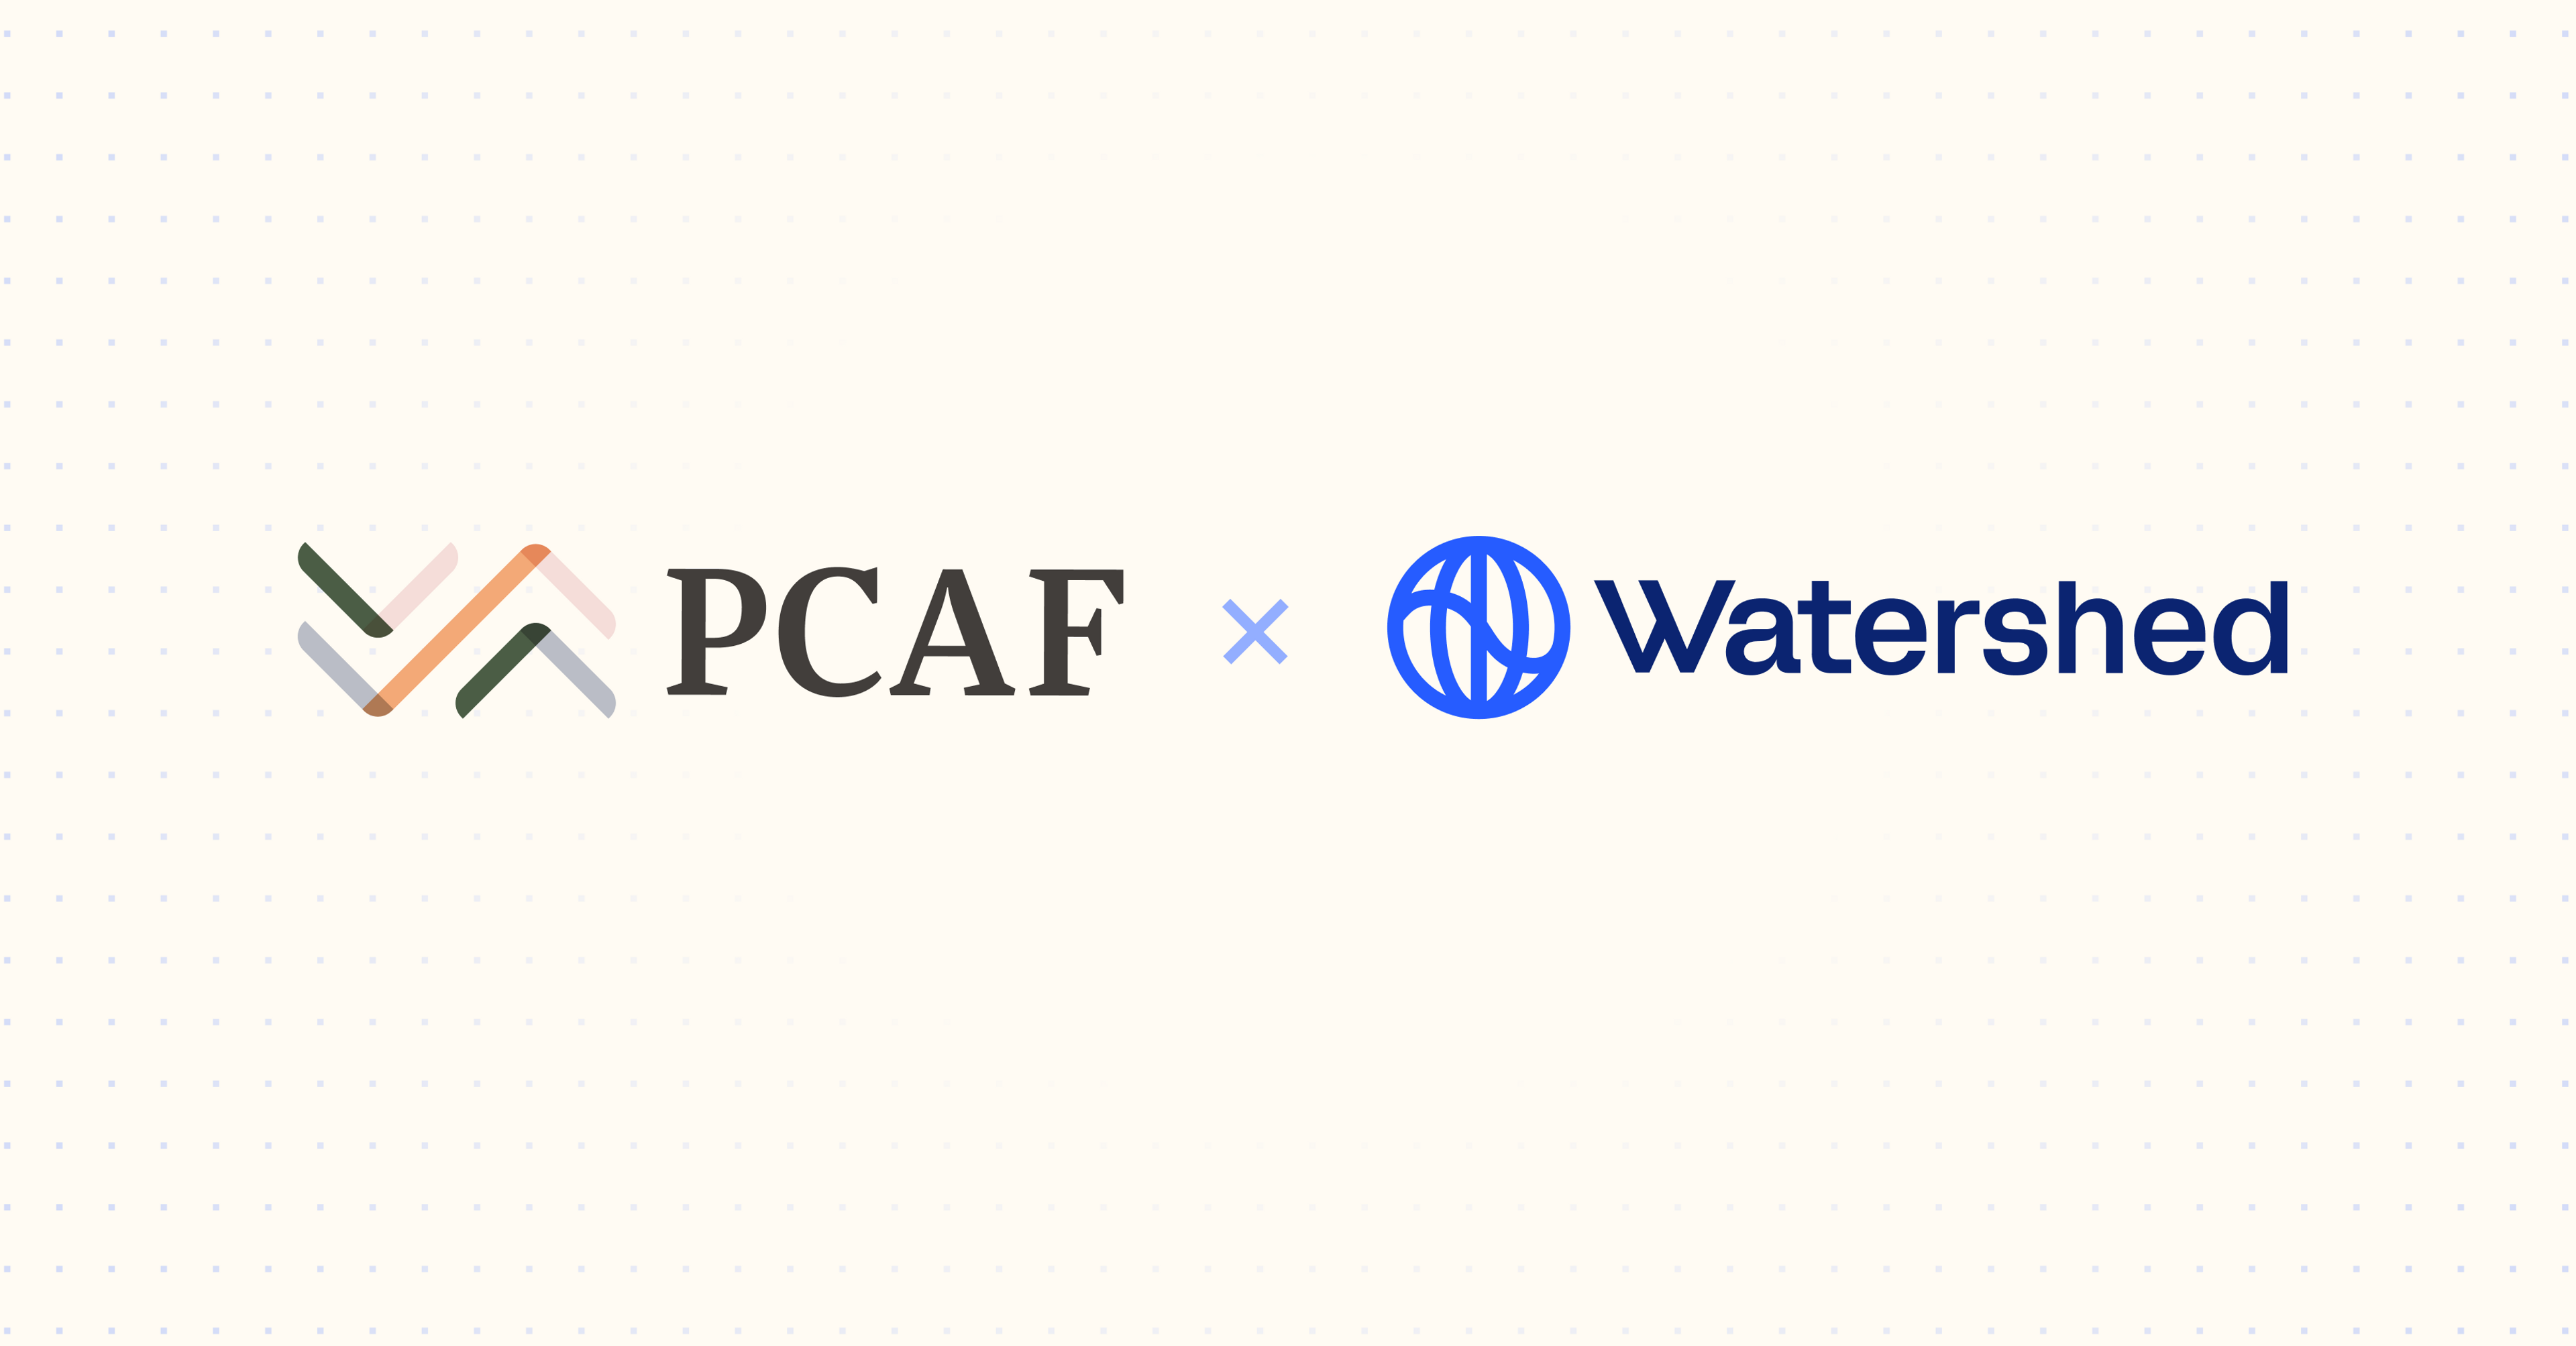 Watershed named as PCAF’s first accredited partner